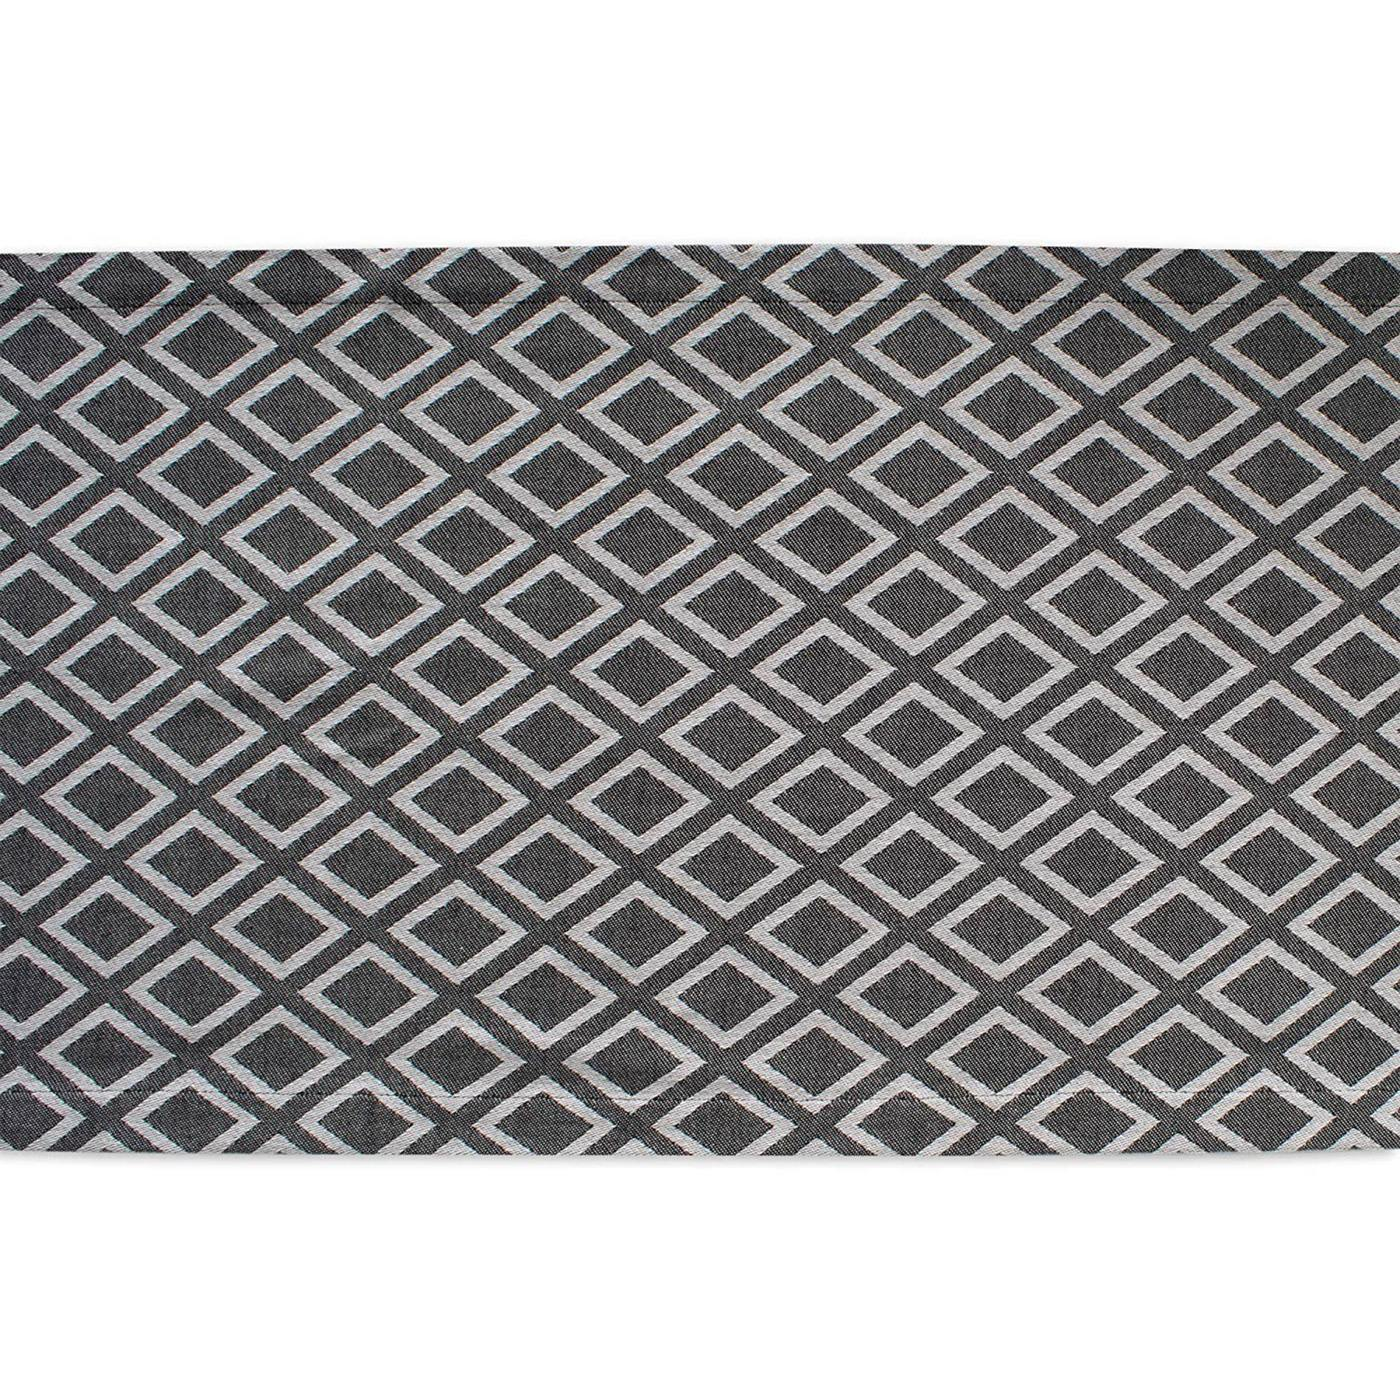 Black and White Diamond Pattern Table Runner - 72 inches